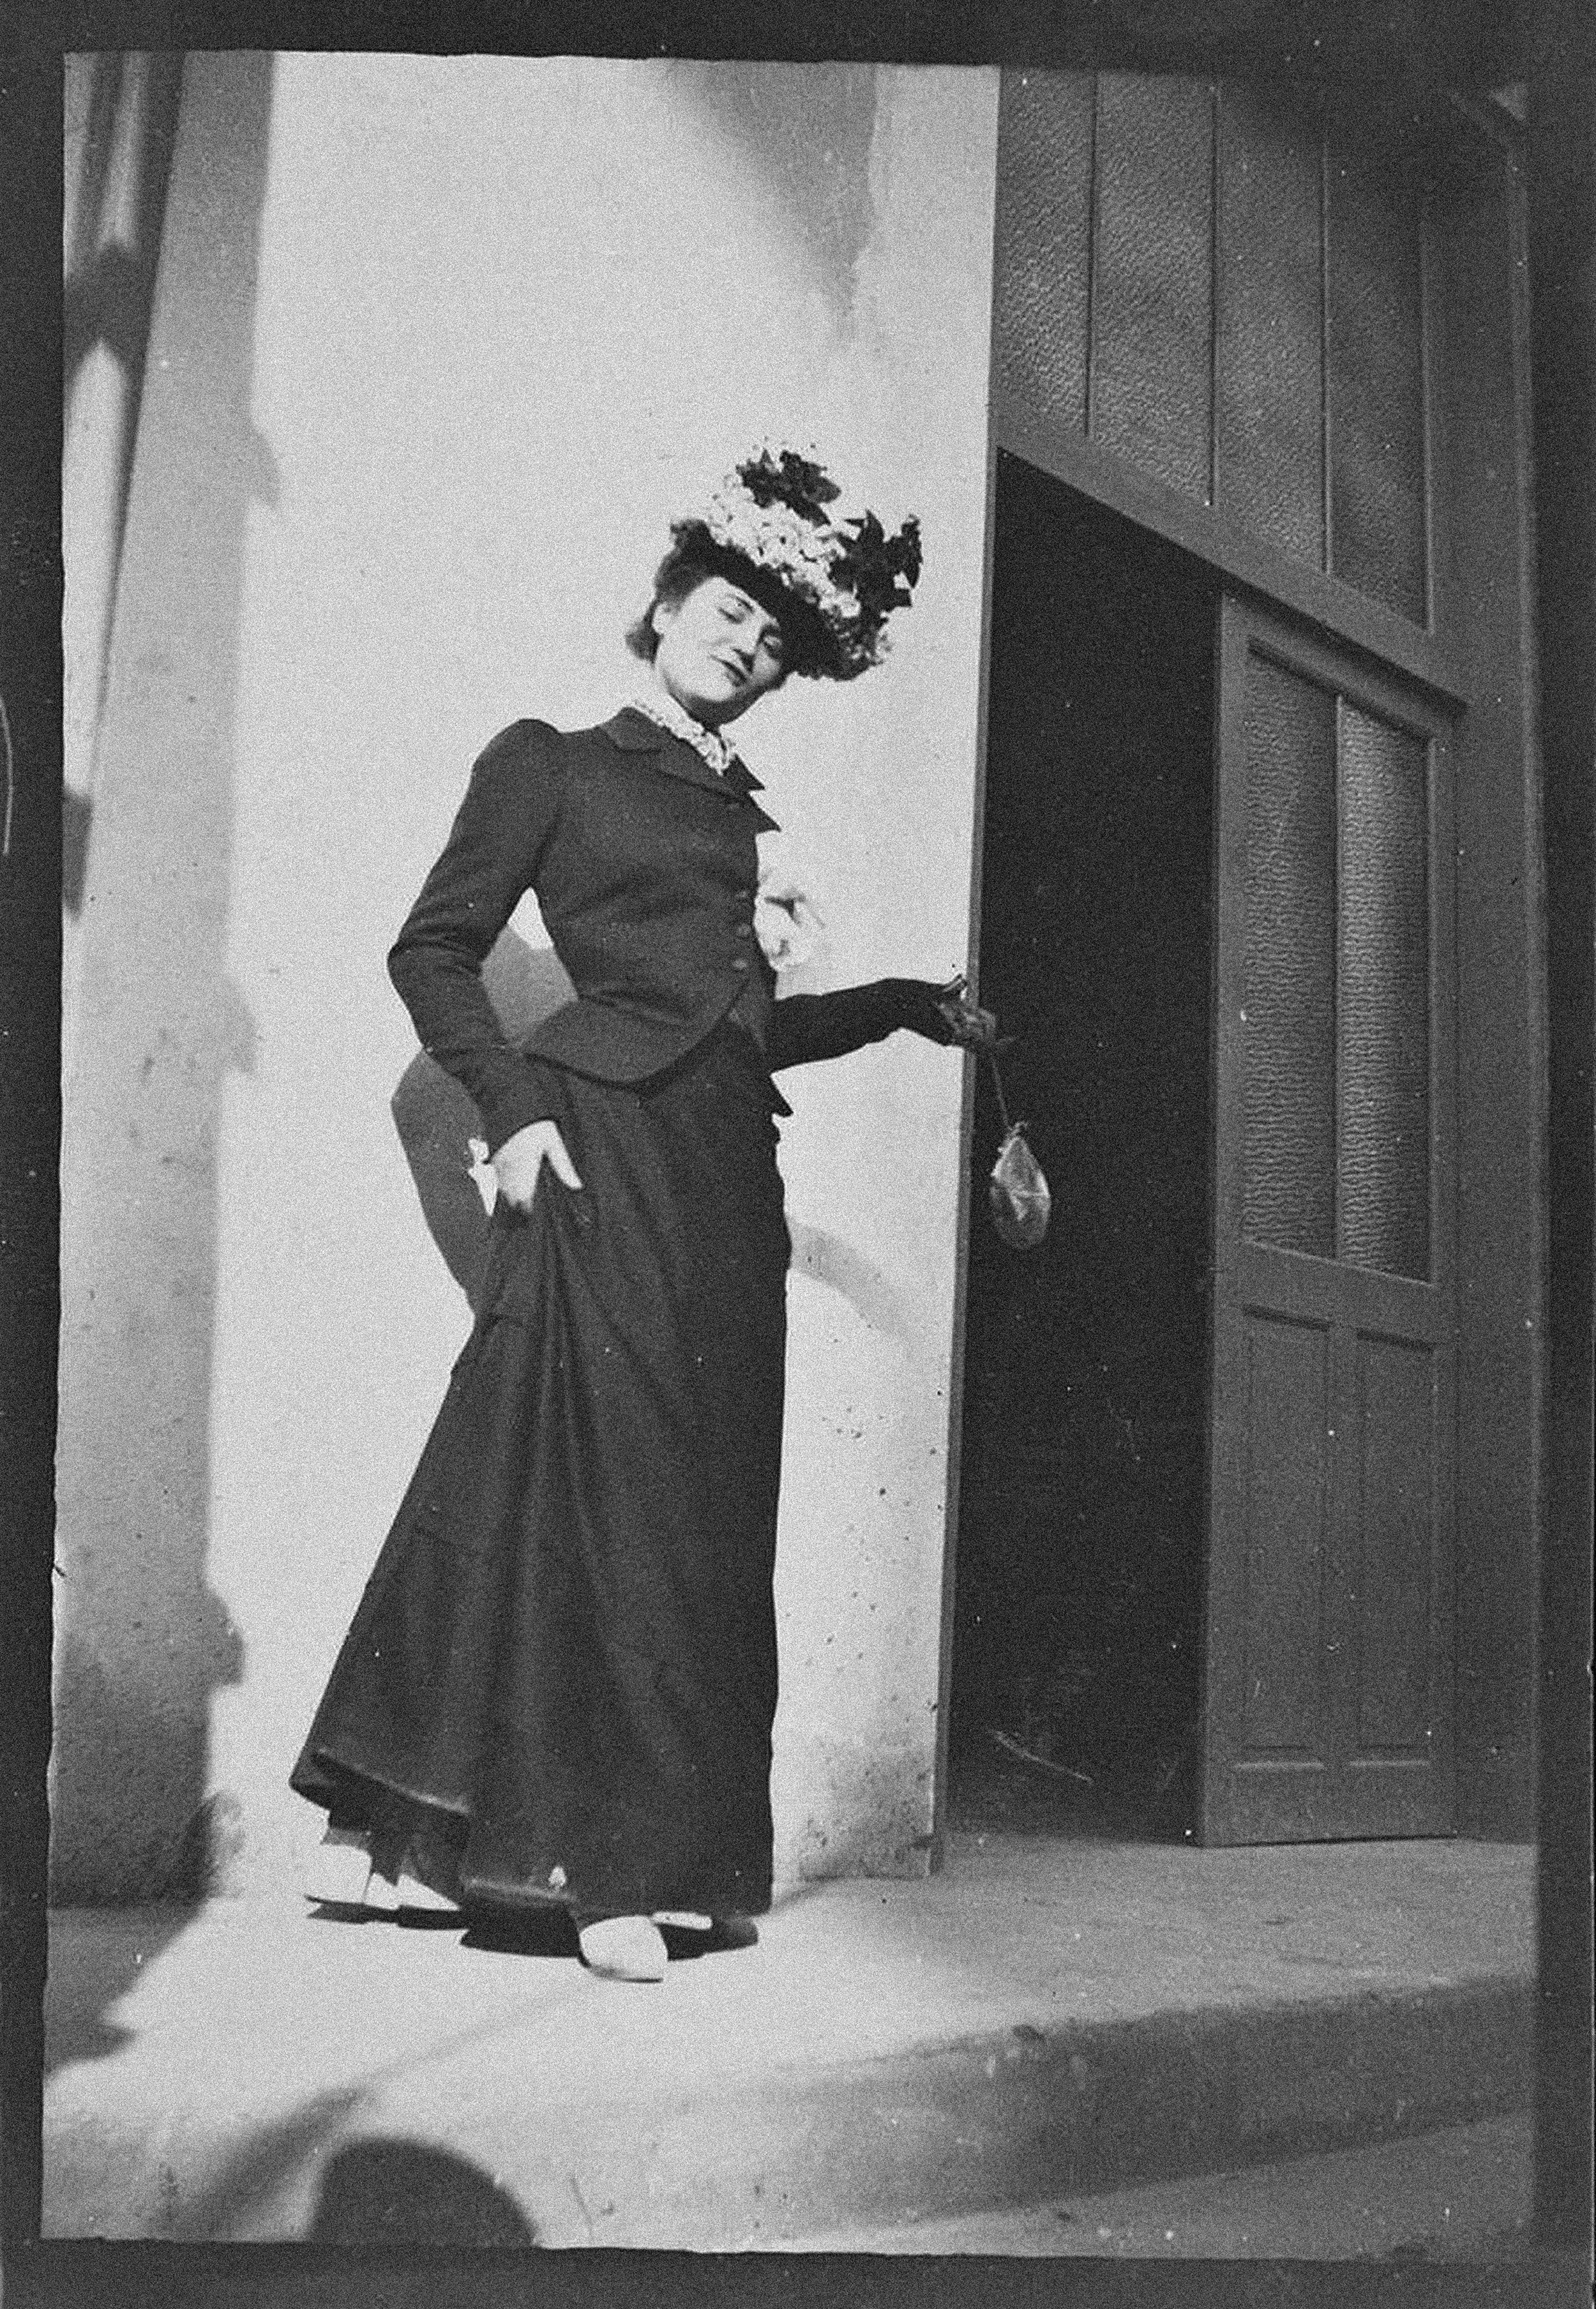 Meet the woman who shot up with Coco Chanel, inspired Proust, and